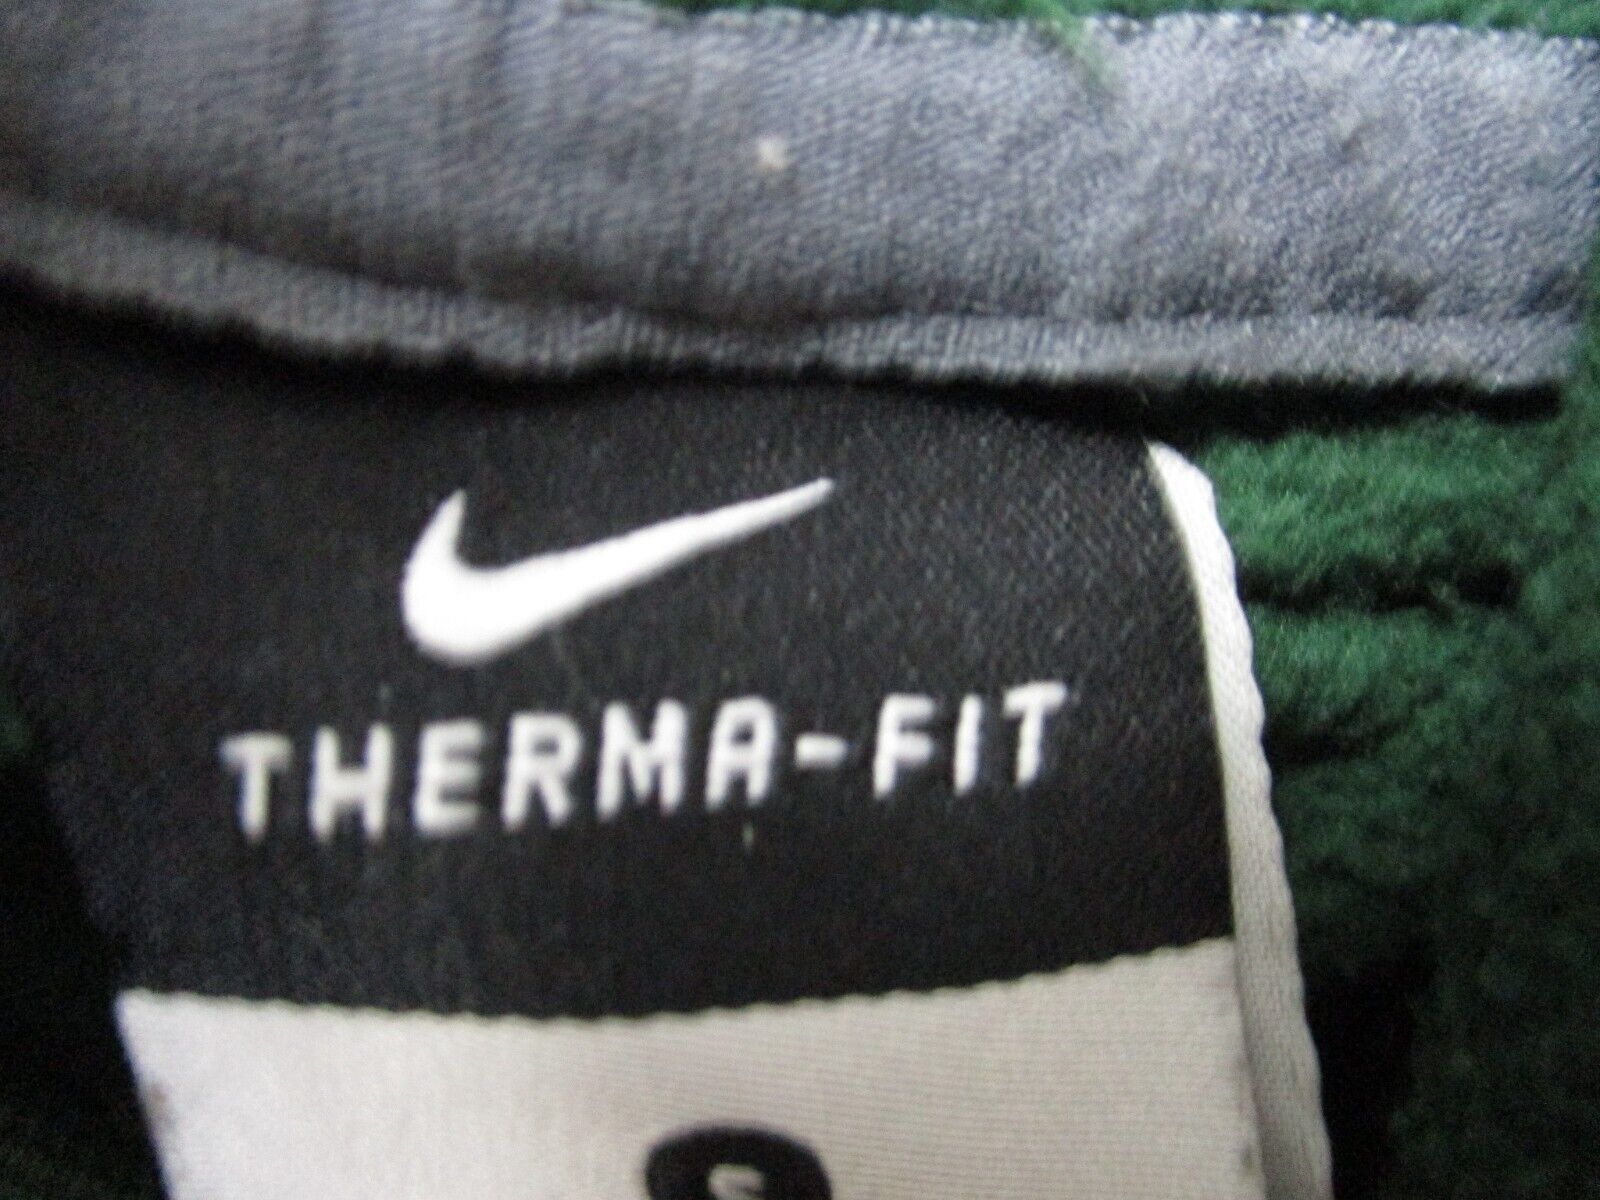 Nike Therma Fit Logo Activewear Hoodies Men's Small Green Pullover